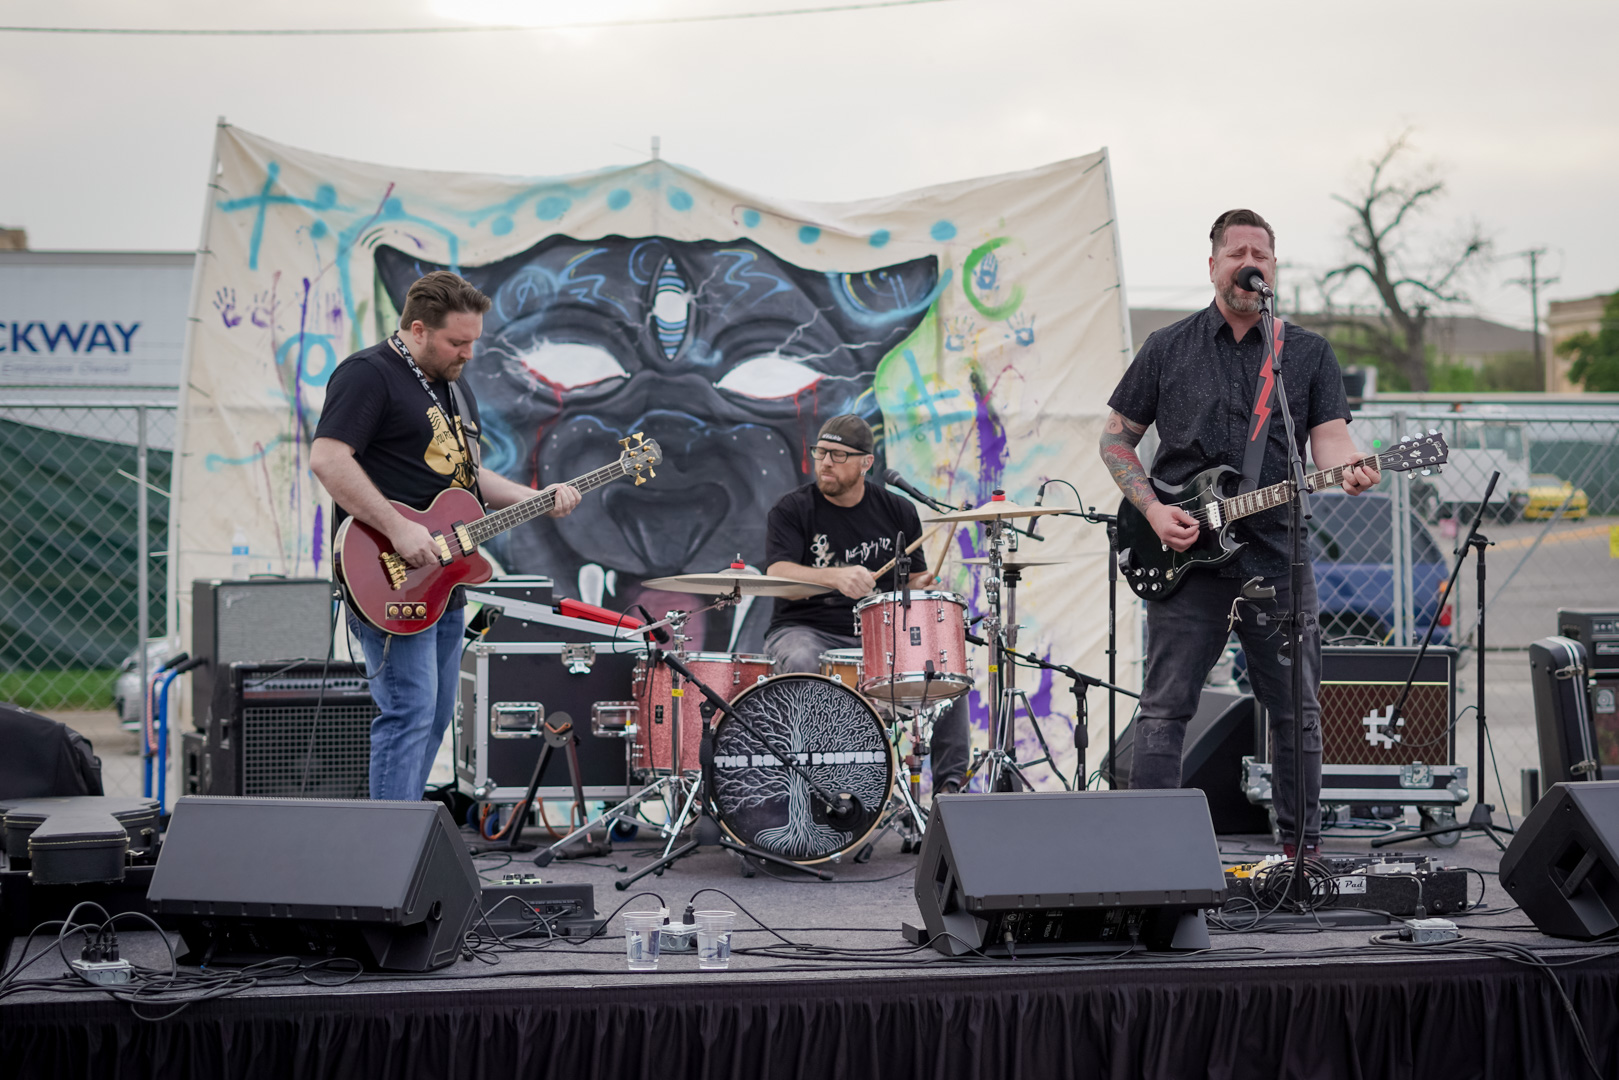 A 3-piece band plays on an outdoor stage in front of painted panther mural